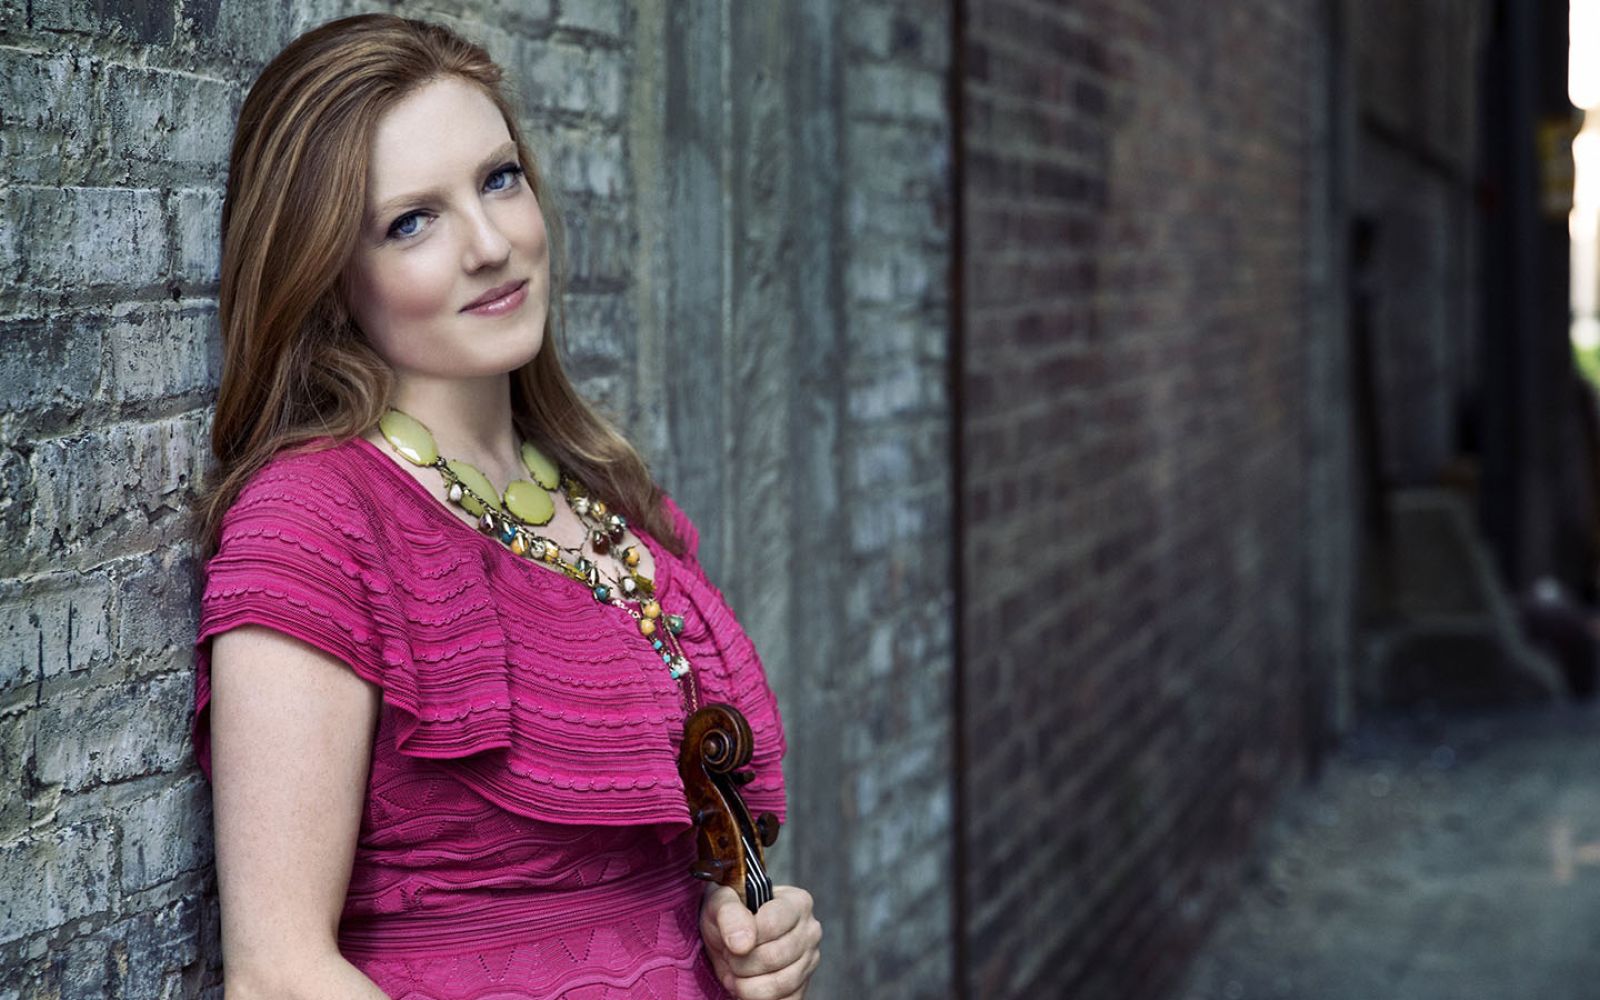 Violinist Rachel Barton Pine will join the Fort Wayne Philharmonic for their performance at Auer Performance Hall on the campus of Purdue University Fort Wayne on Saturday, March 9.